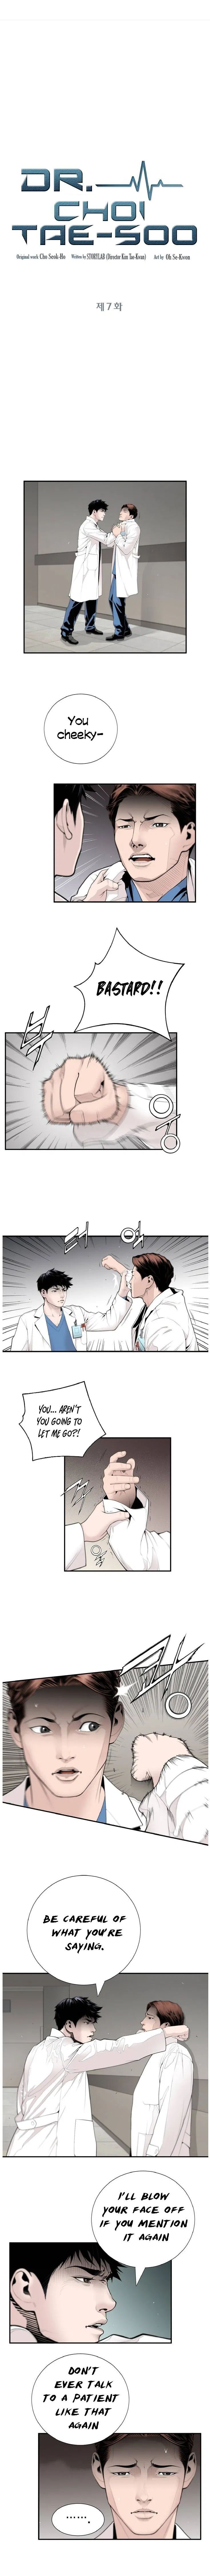 Dr. Choi Tae-Soo Chapter 7 page 2